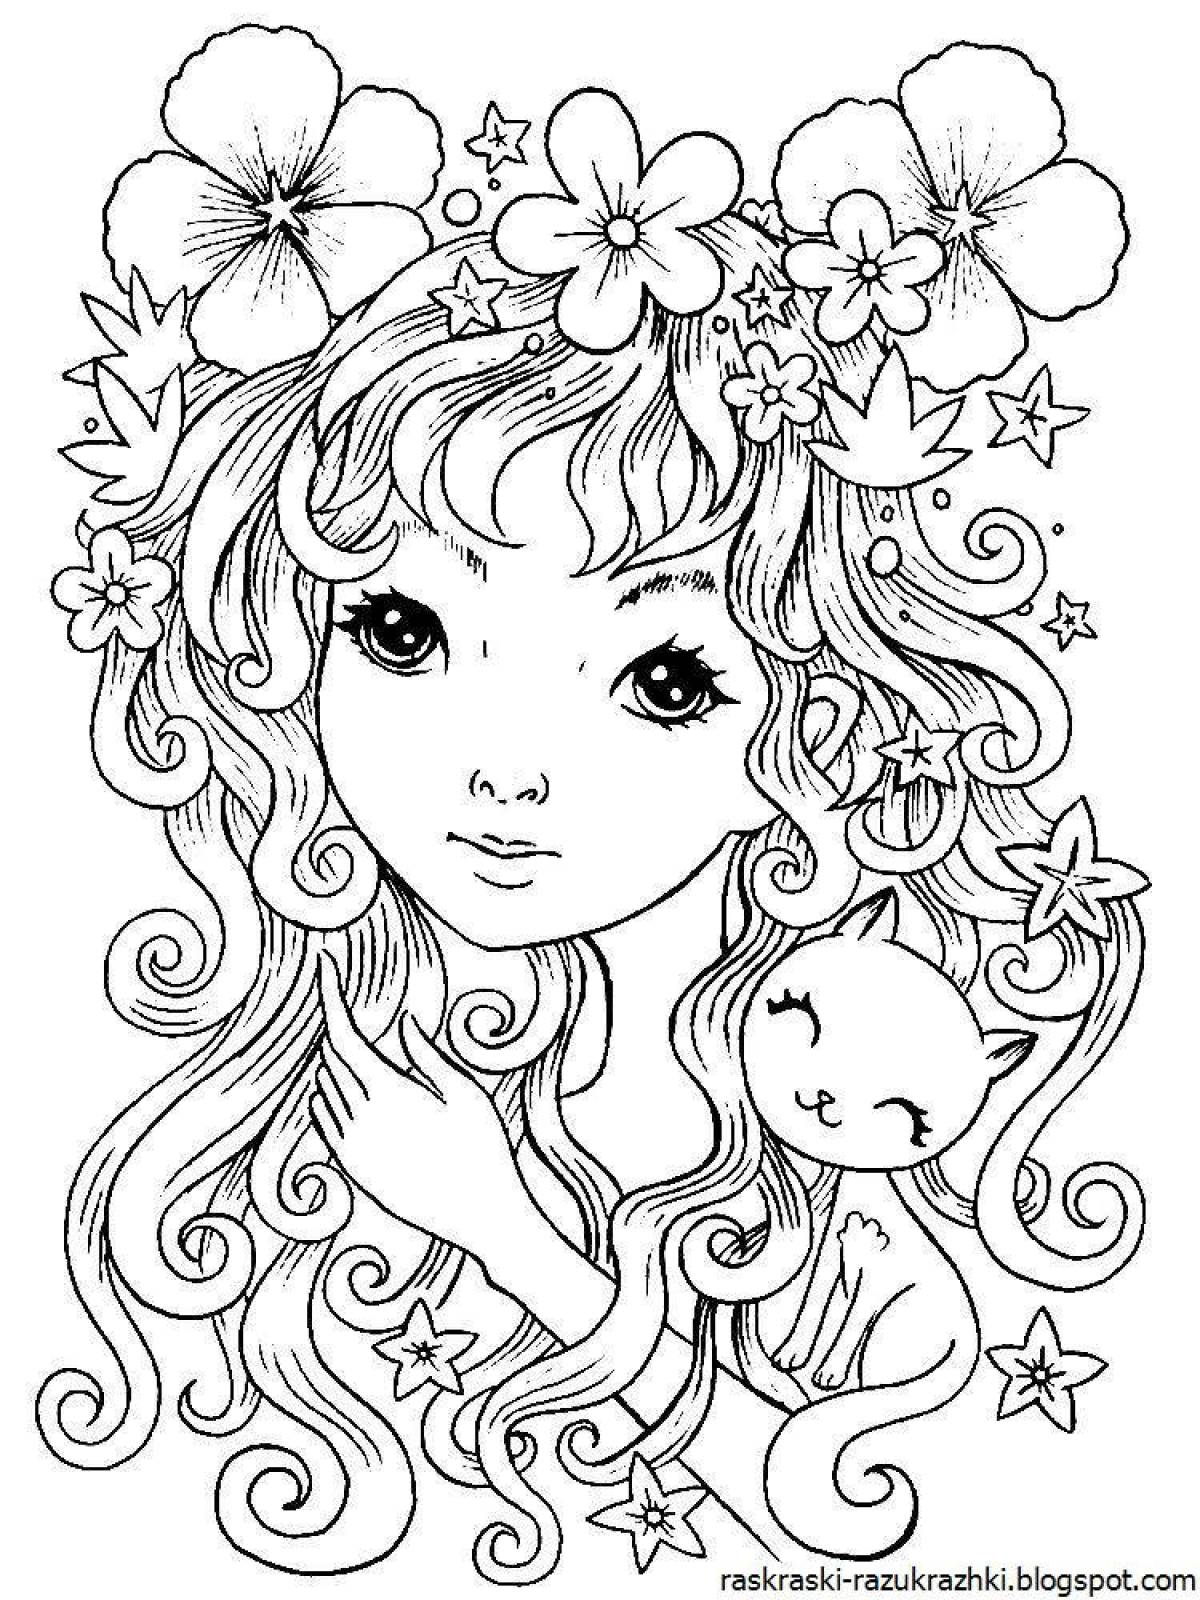 Charming coloring book for girls 10 years old